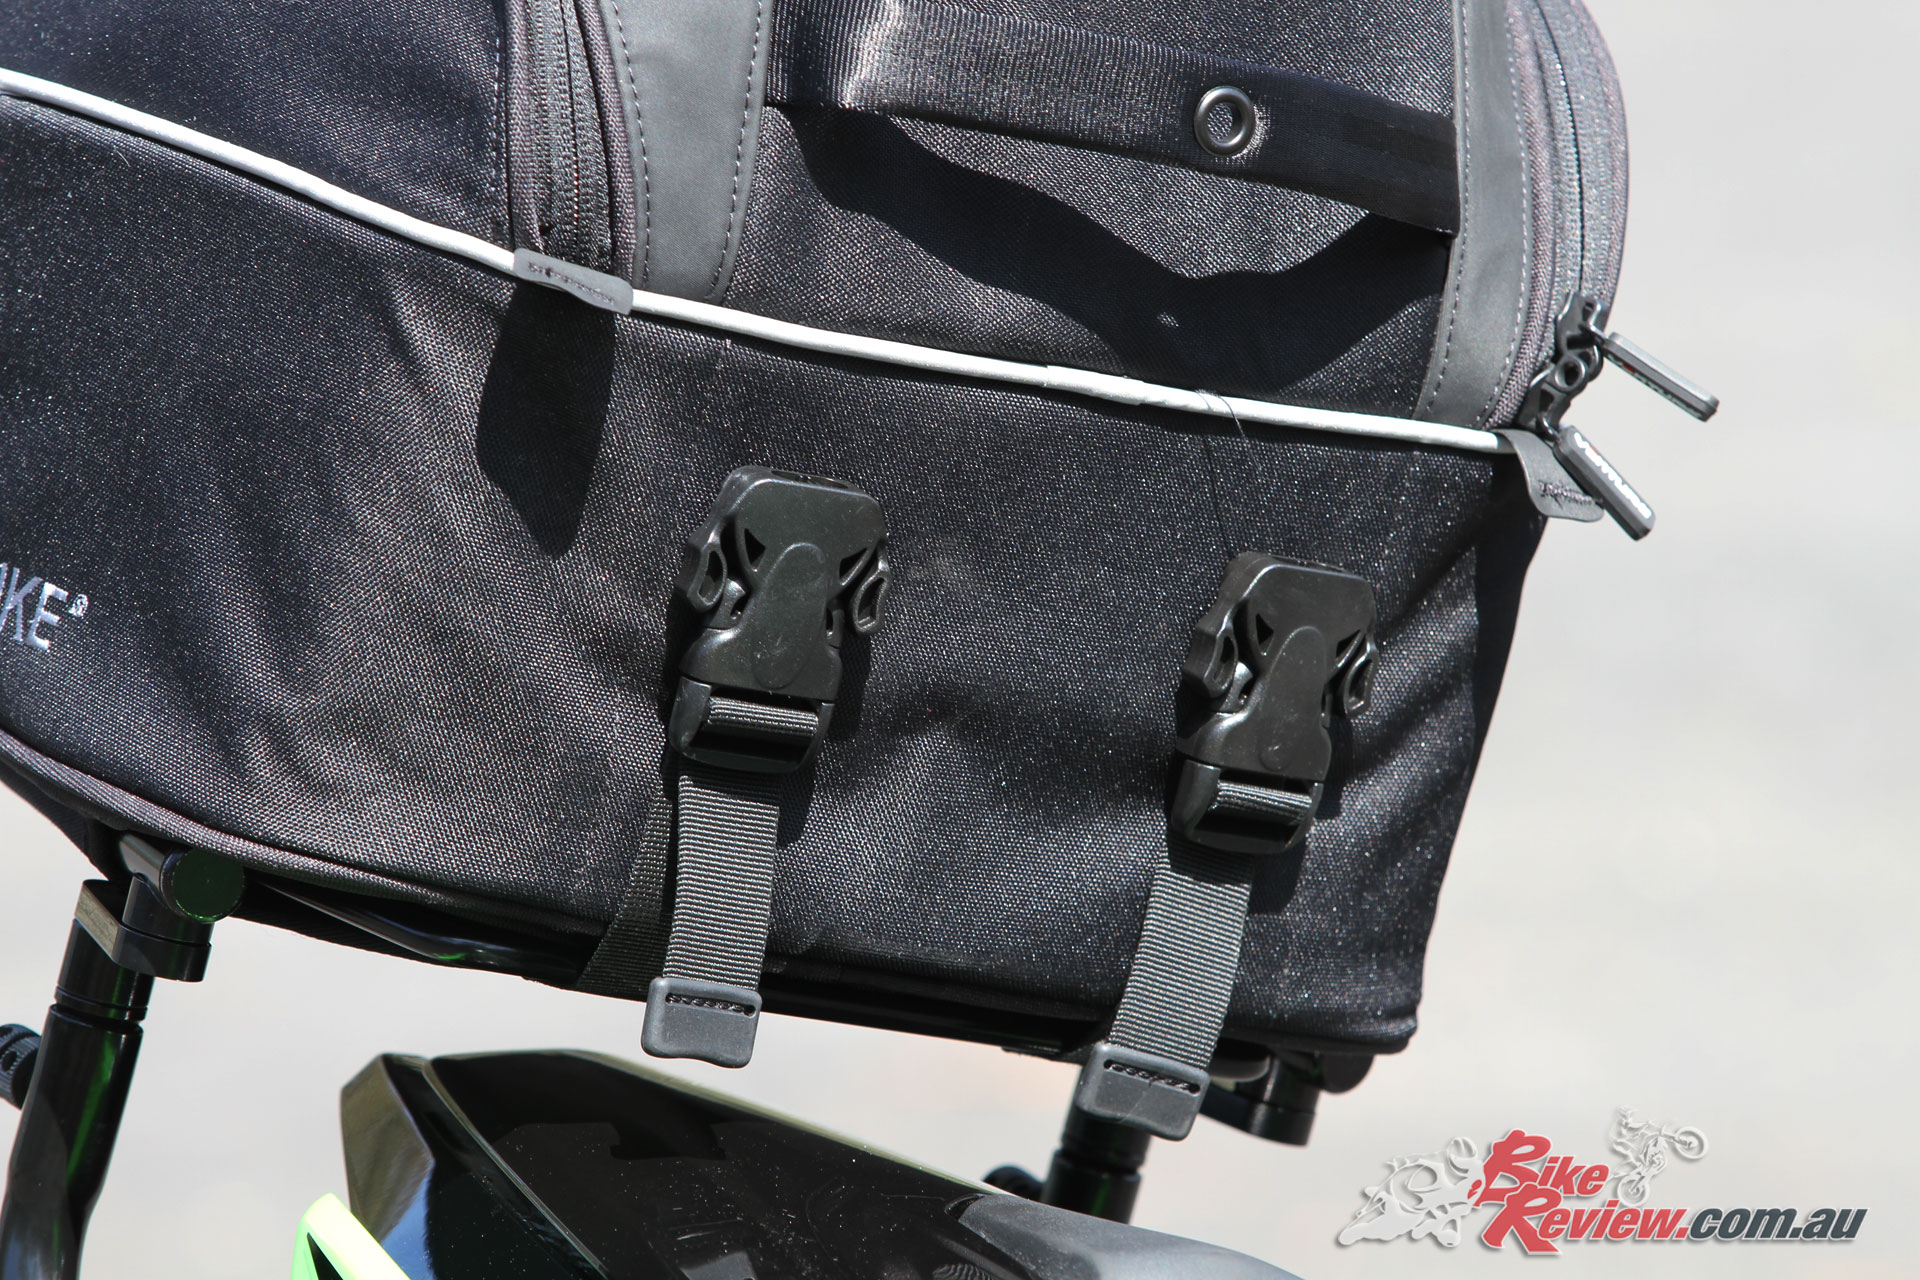 These quick release buckles are seriously heavy duty, meaning the bag won't be coming loose if secured properly, but requires a bit of strength to release.